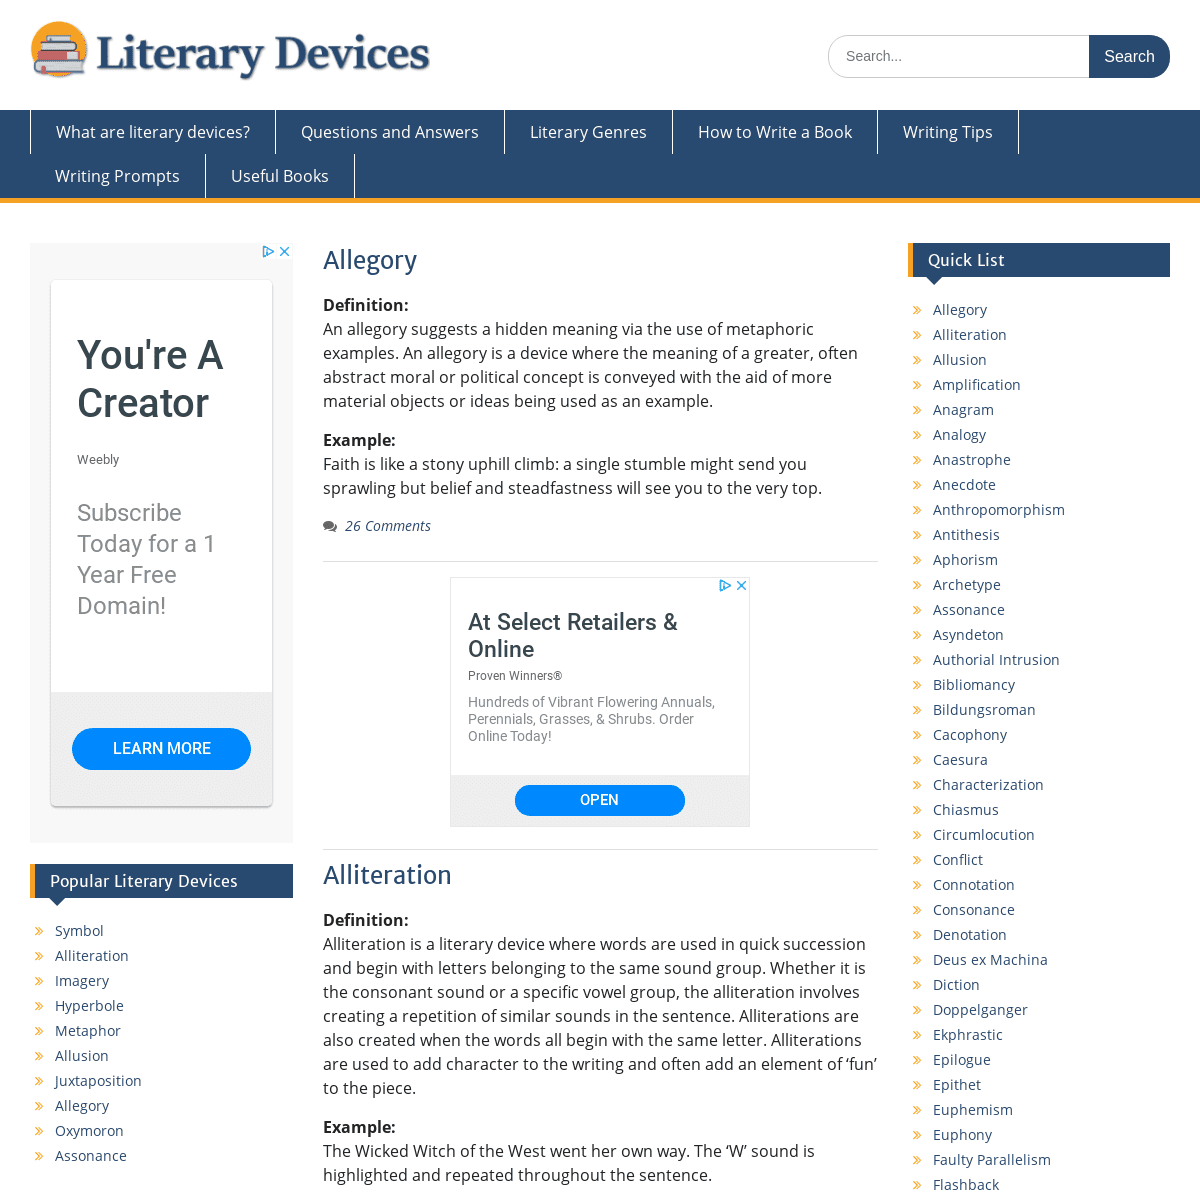 A complete backup of literary-devices.com